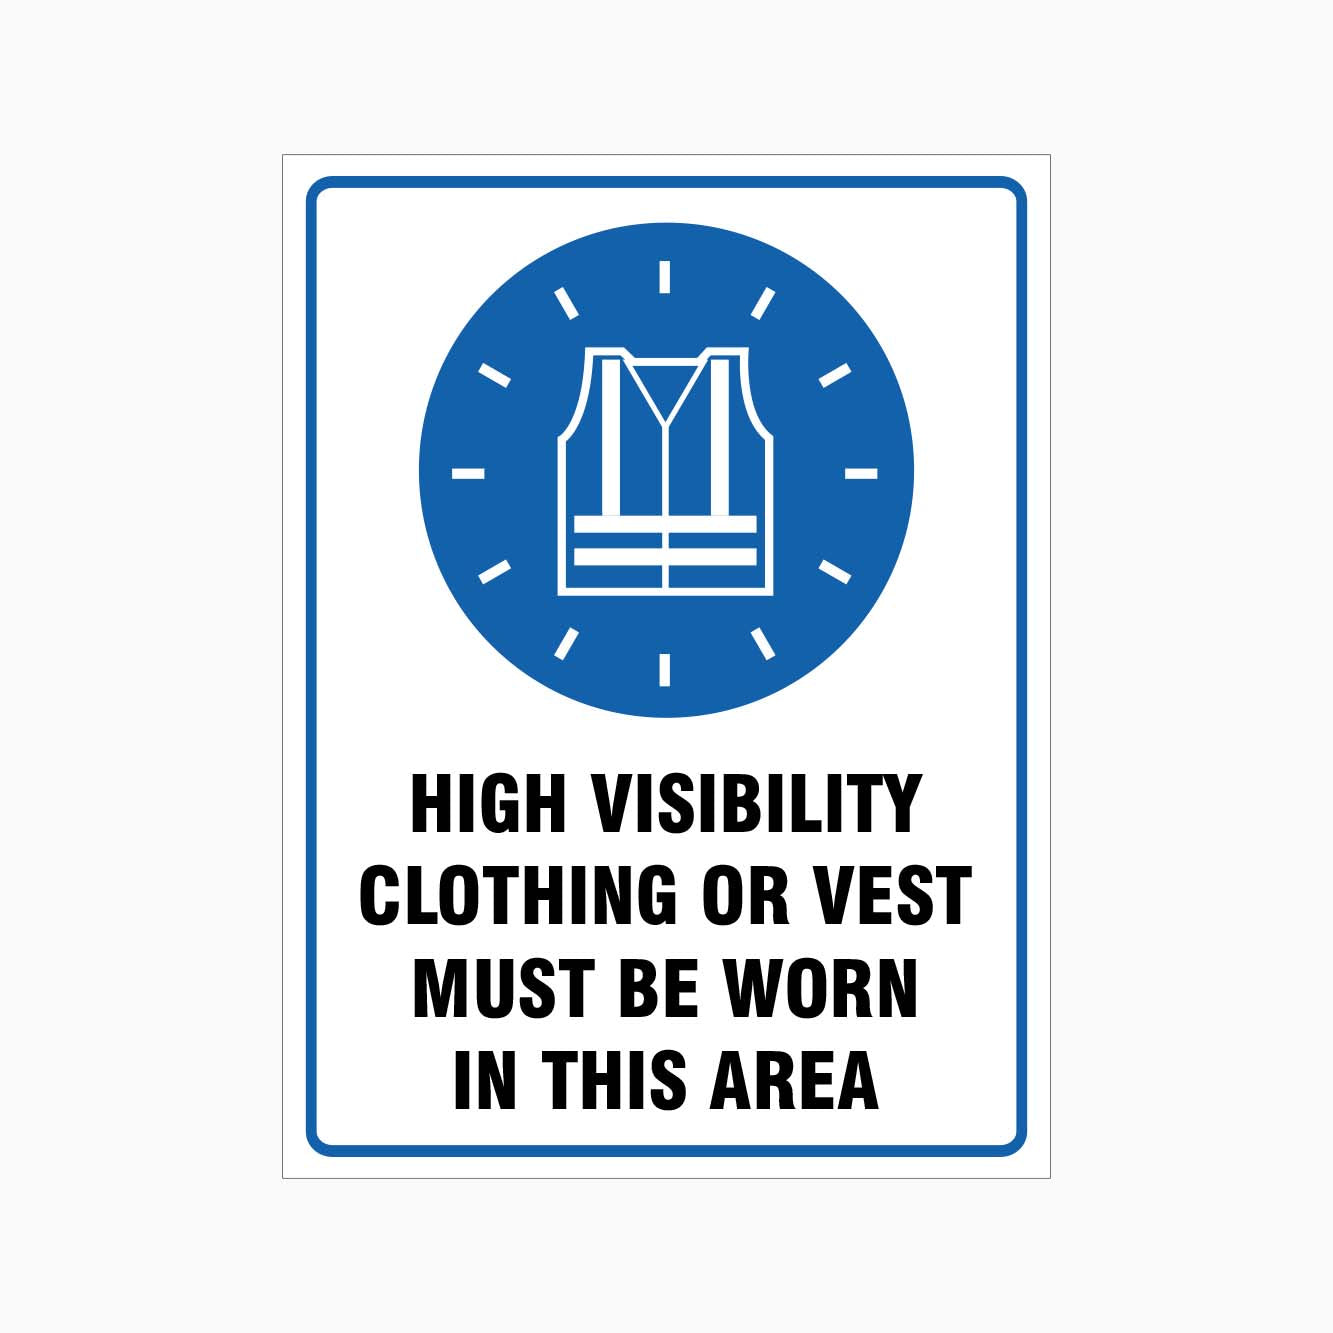 HIGH VISIBILITY CLOTHING OR VEST MUST BE WORN IN THIS AREA SIGN - GET SIGNS